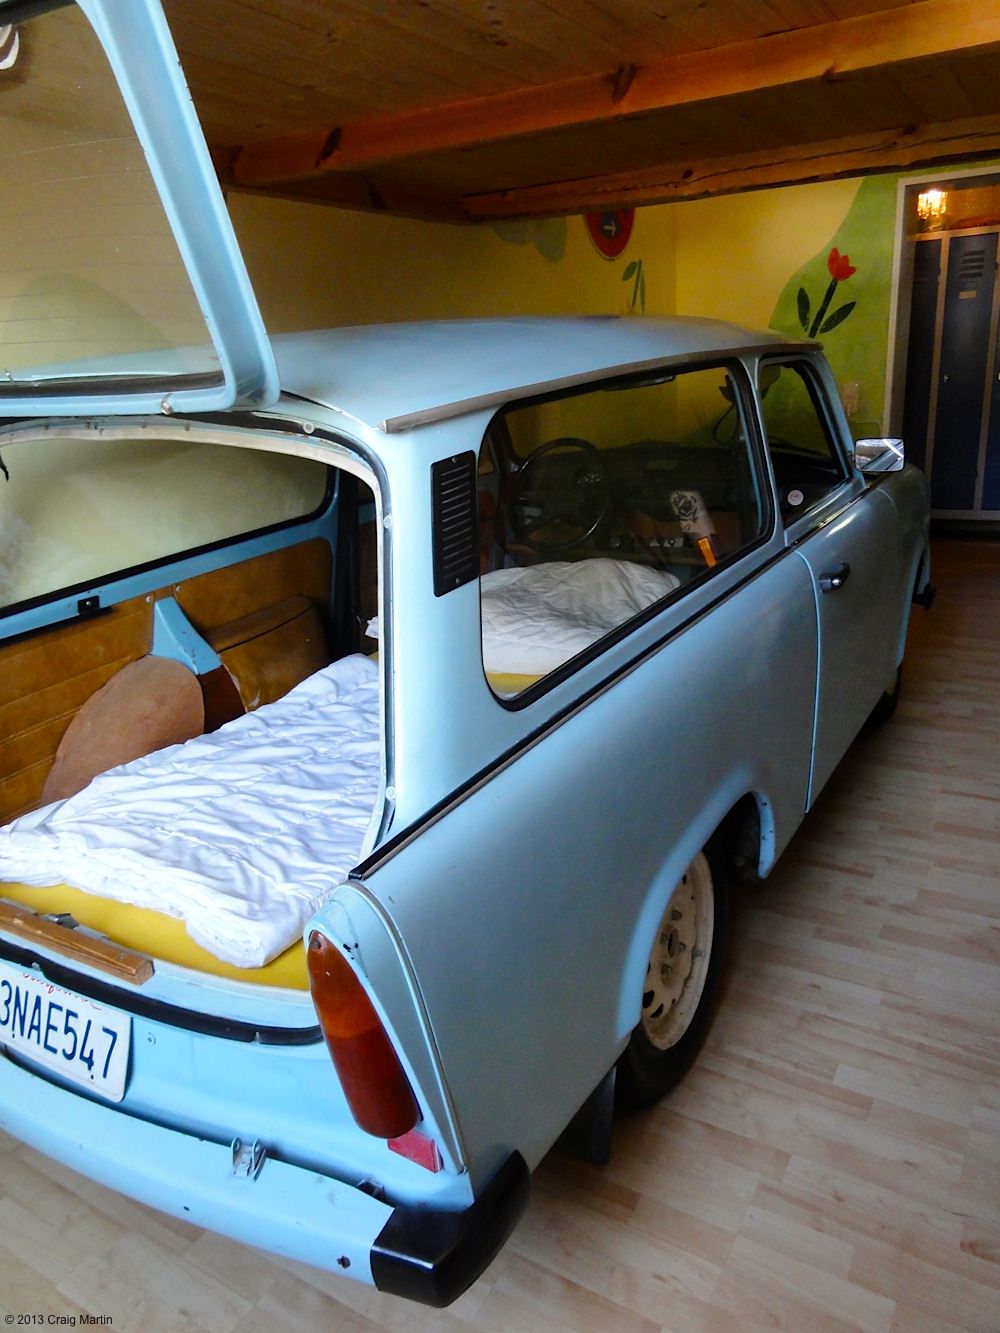 We stayed in the Hostel Lollis... with a Trabant for a bed.